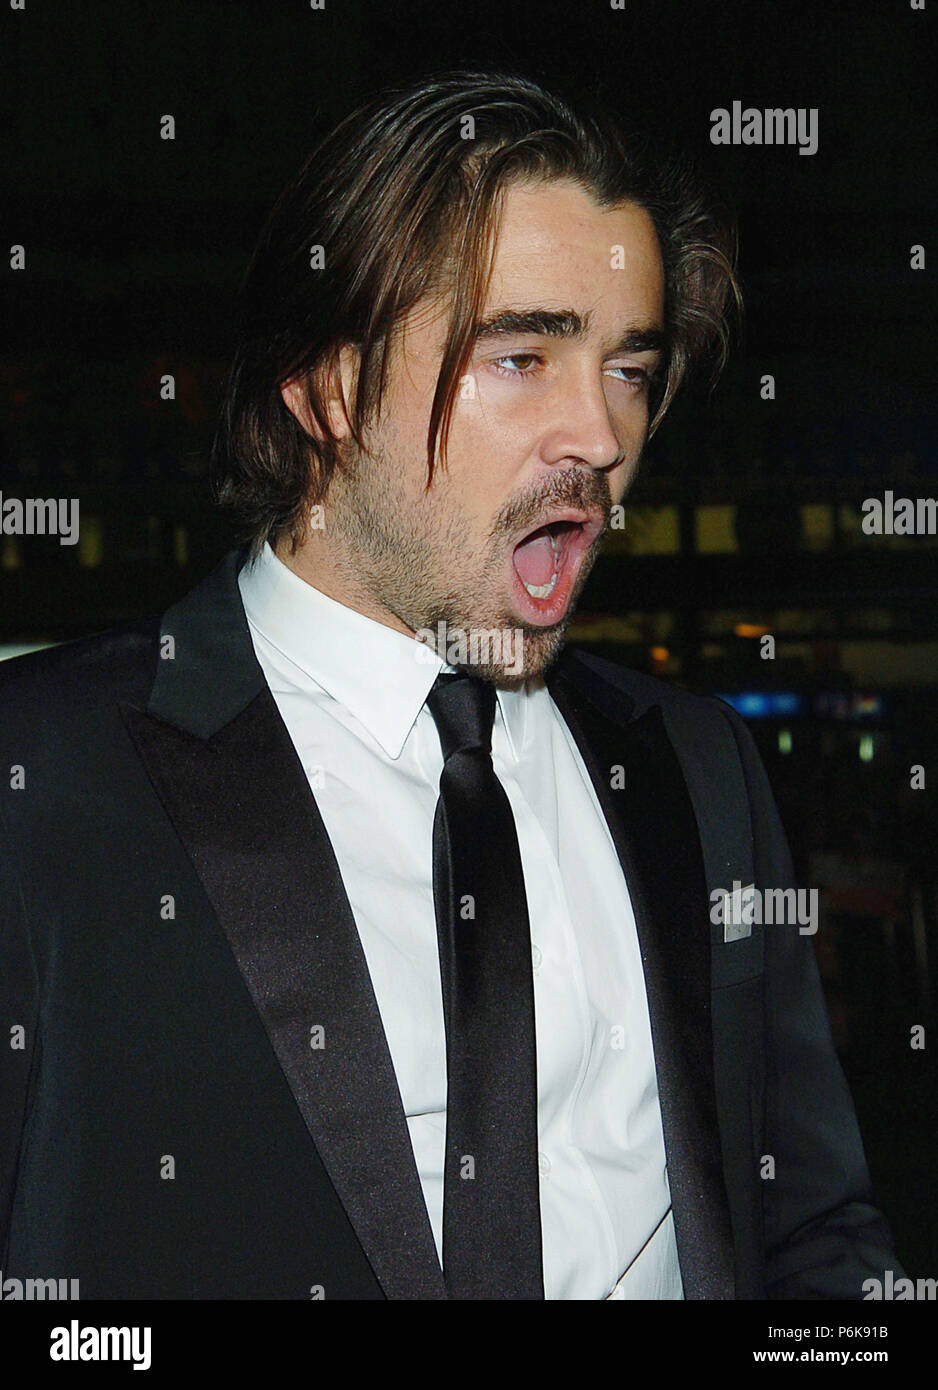 Colin Farrell arriving Alexander Premiere at the Chinese Theatre in Los Angeless. November 16, 2004.FarrellColin009A Red Carpet Event, Vertical, USA, Film Industry, Celebrities,  Photography, Bestof, Arts Culture and Entertainment, Topix Celebrities fashion /  Vertical, Best of, Event in Hollywood Life - California,  Red Carpet and backstage, USA, Film Industry, Celebrities,  movie celebrities, TV celebrities, Music celebrities, Photography, Bestof, Arts Culture and Entertainment,  Topix, headshot, vertical, one person,, from the year , 2004, inquiry tsuni@Gamma-USA.com Stock Photo